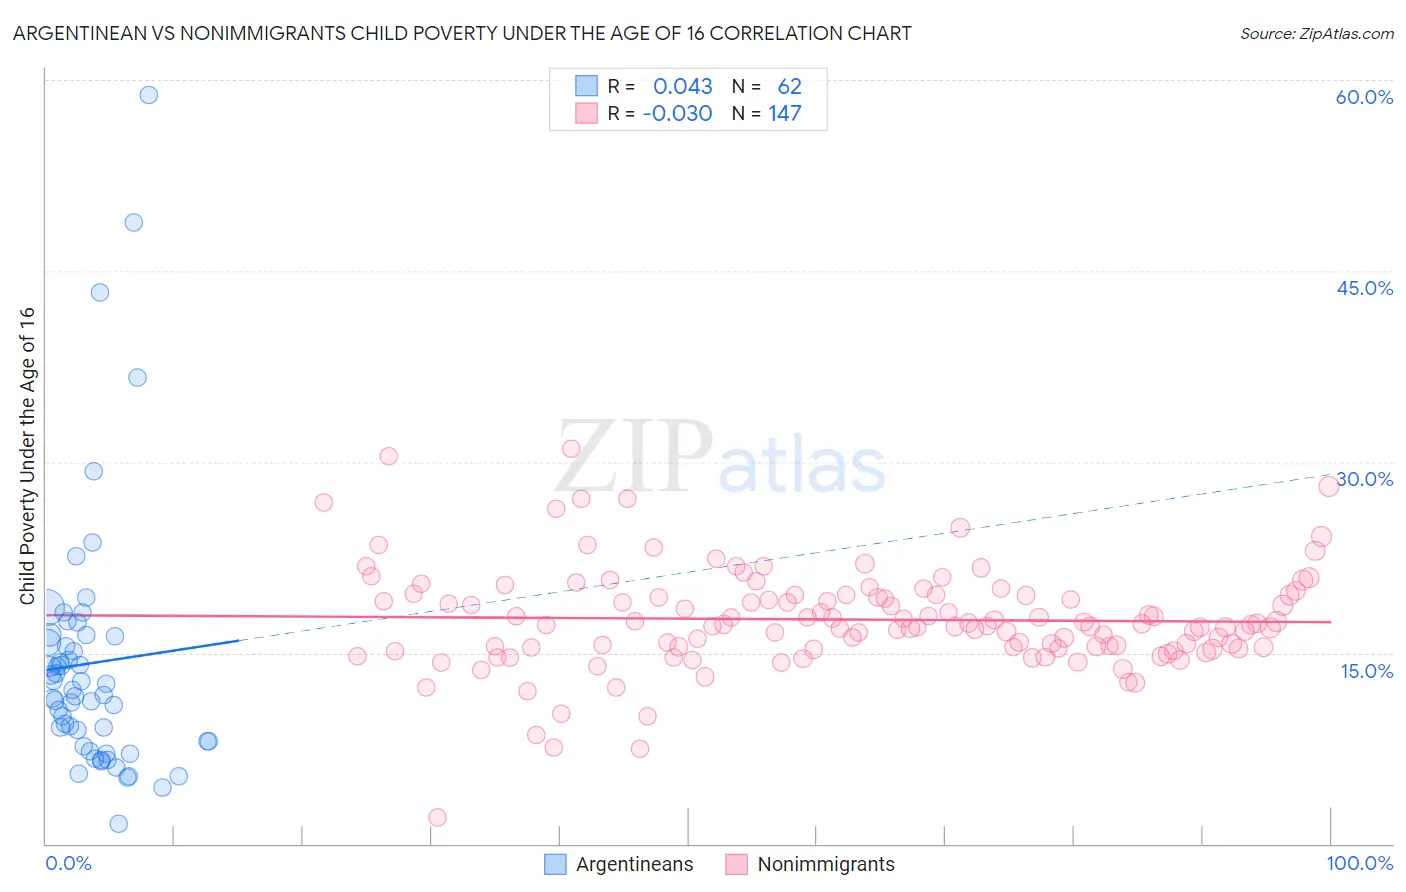 Argentinean vs Nonimmigrants Child Poverty Under the Age of 16